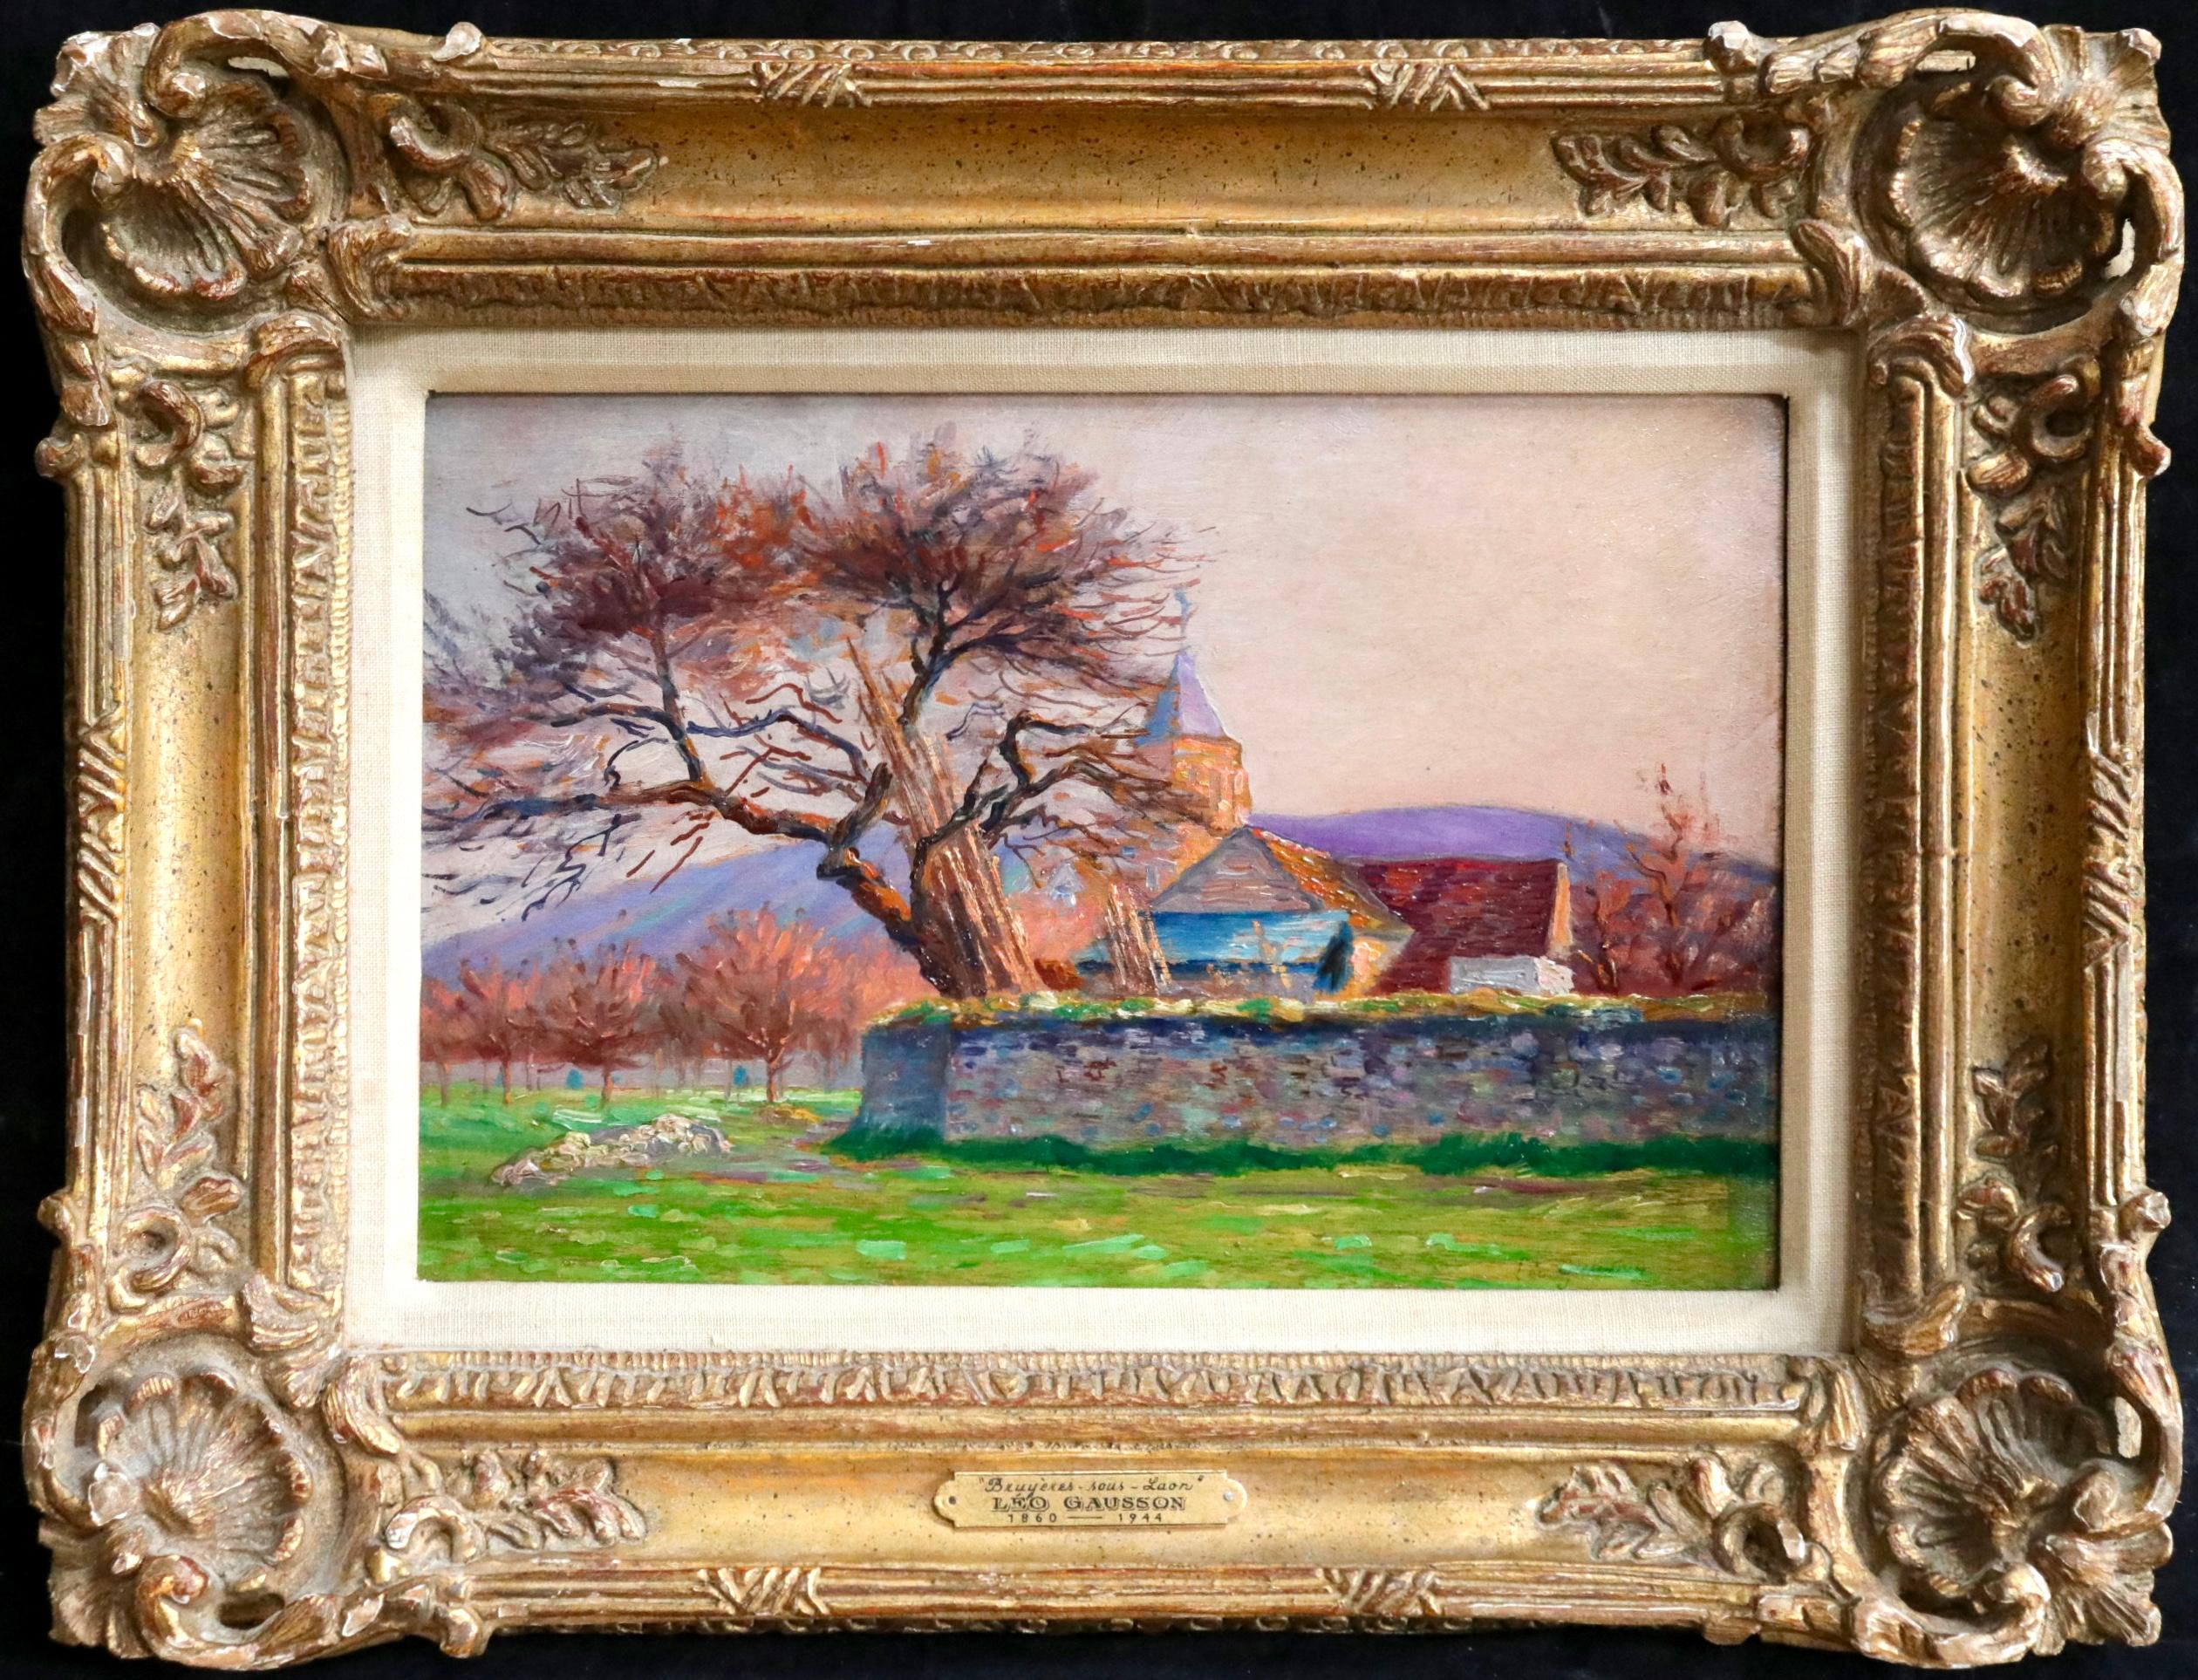 Bruyères-Sous-Laon - Post Impressionist Landscape Oil by Leo Marie Gausson - Painting by Léo Marie Gausson